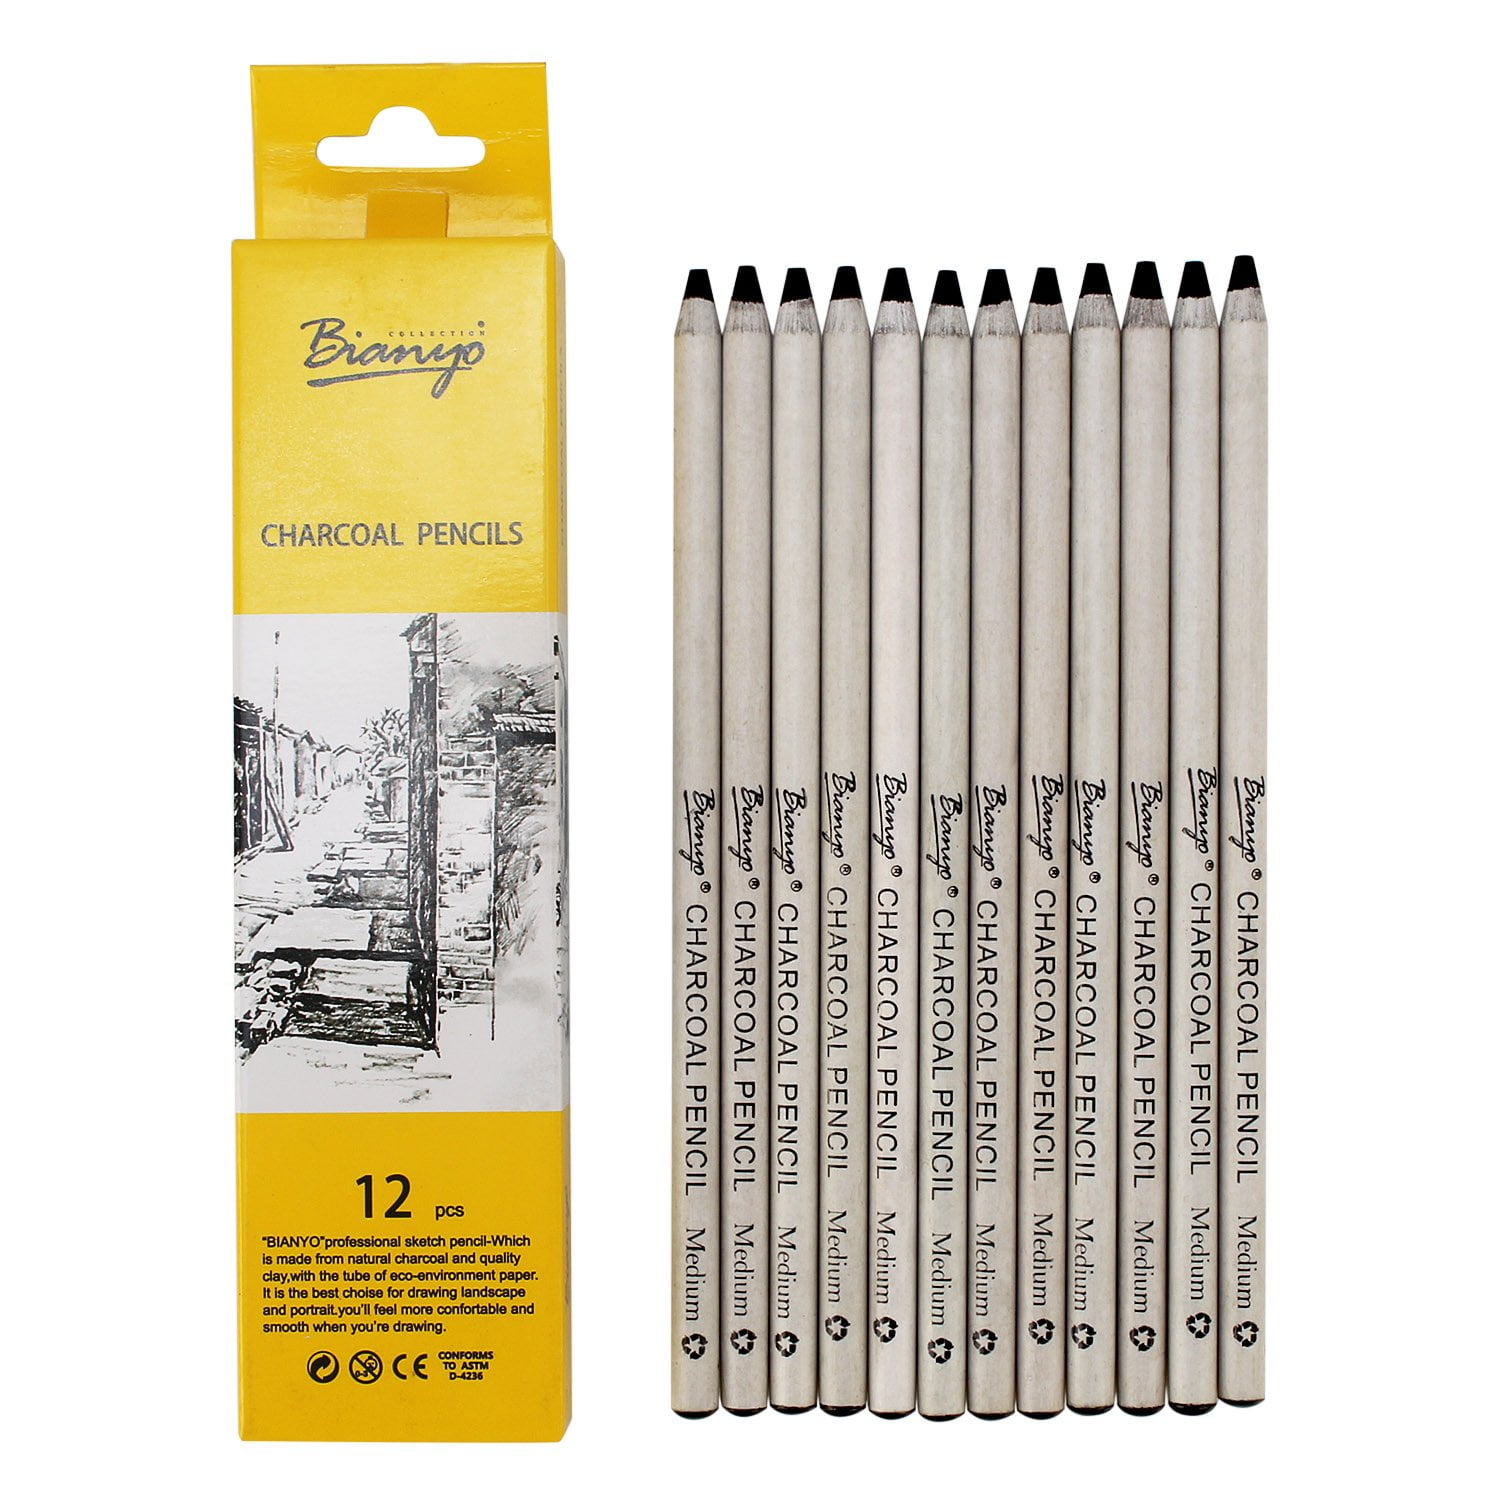 Mduoduo 14 Pcs Sketch Pencil Drawing 6H-12B Art Tool Non-toxic Kit for  Artists Students